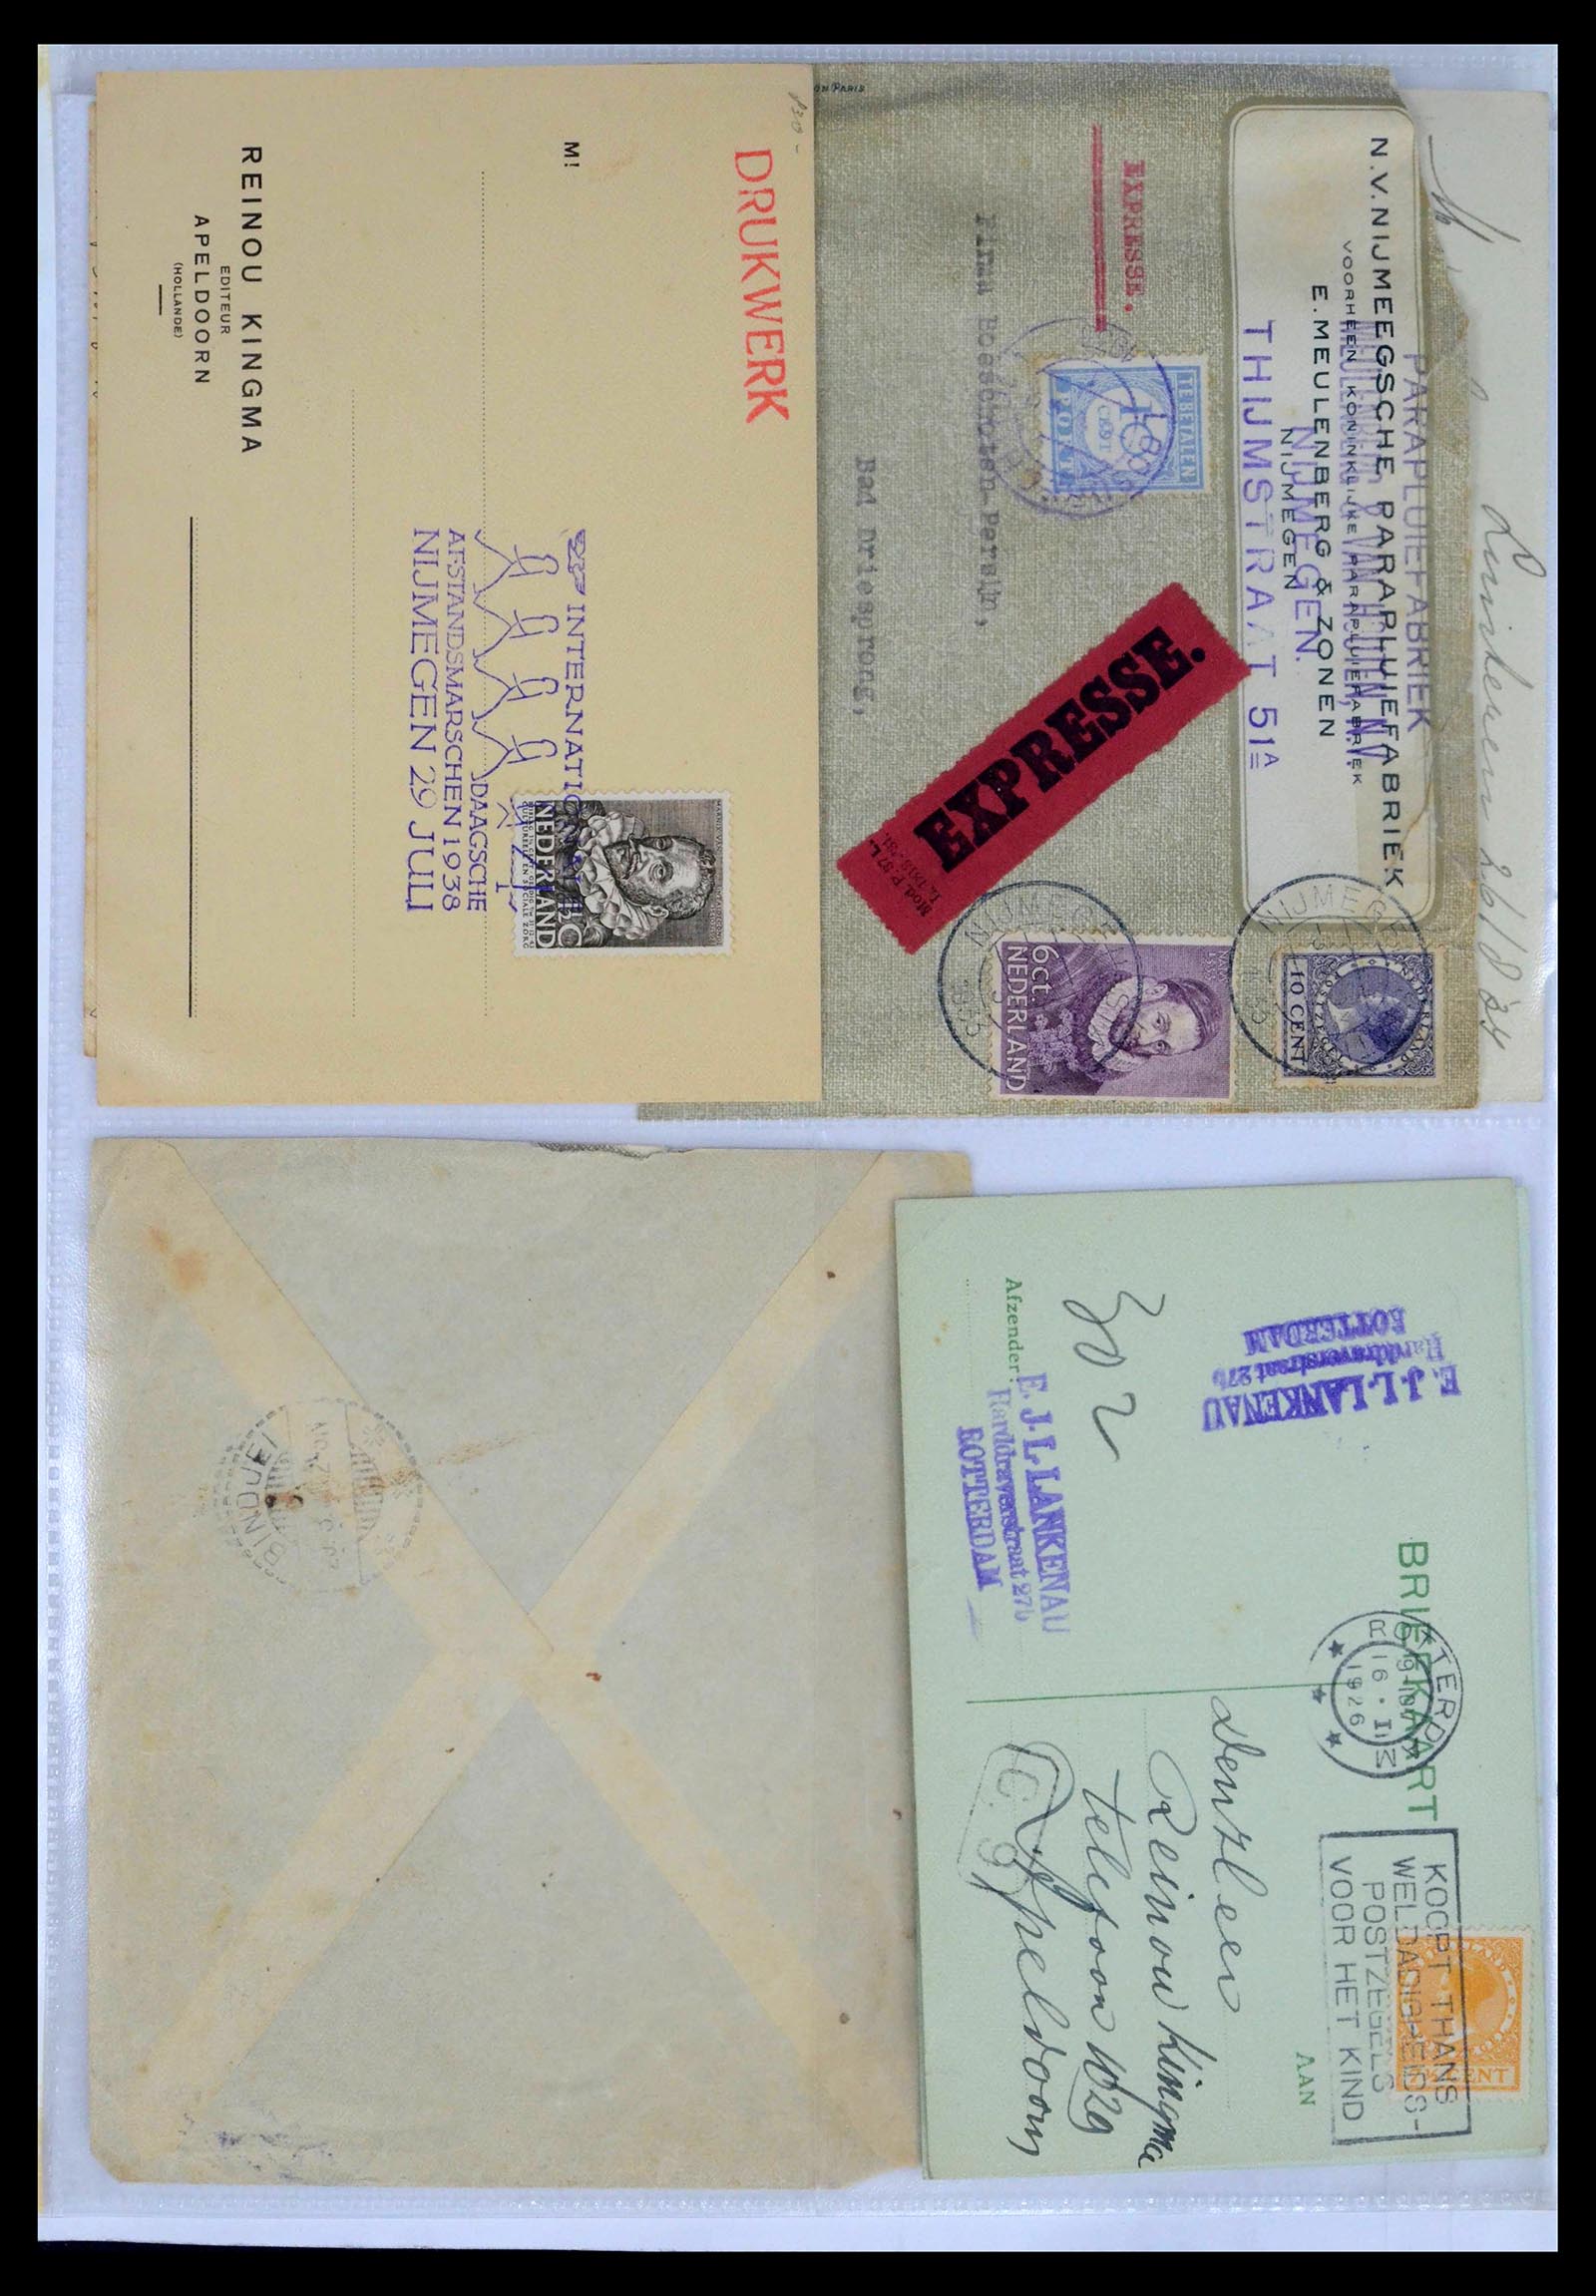 39429 0049 - Stamp collection 39429 Netherlands covers 1821-1955.